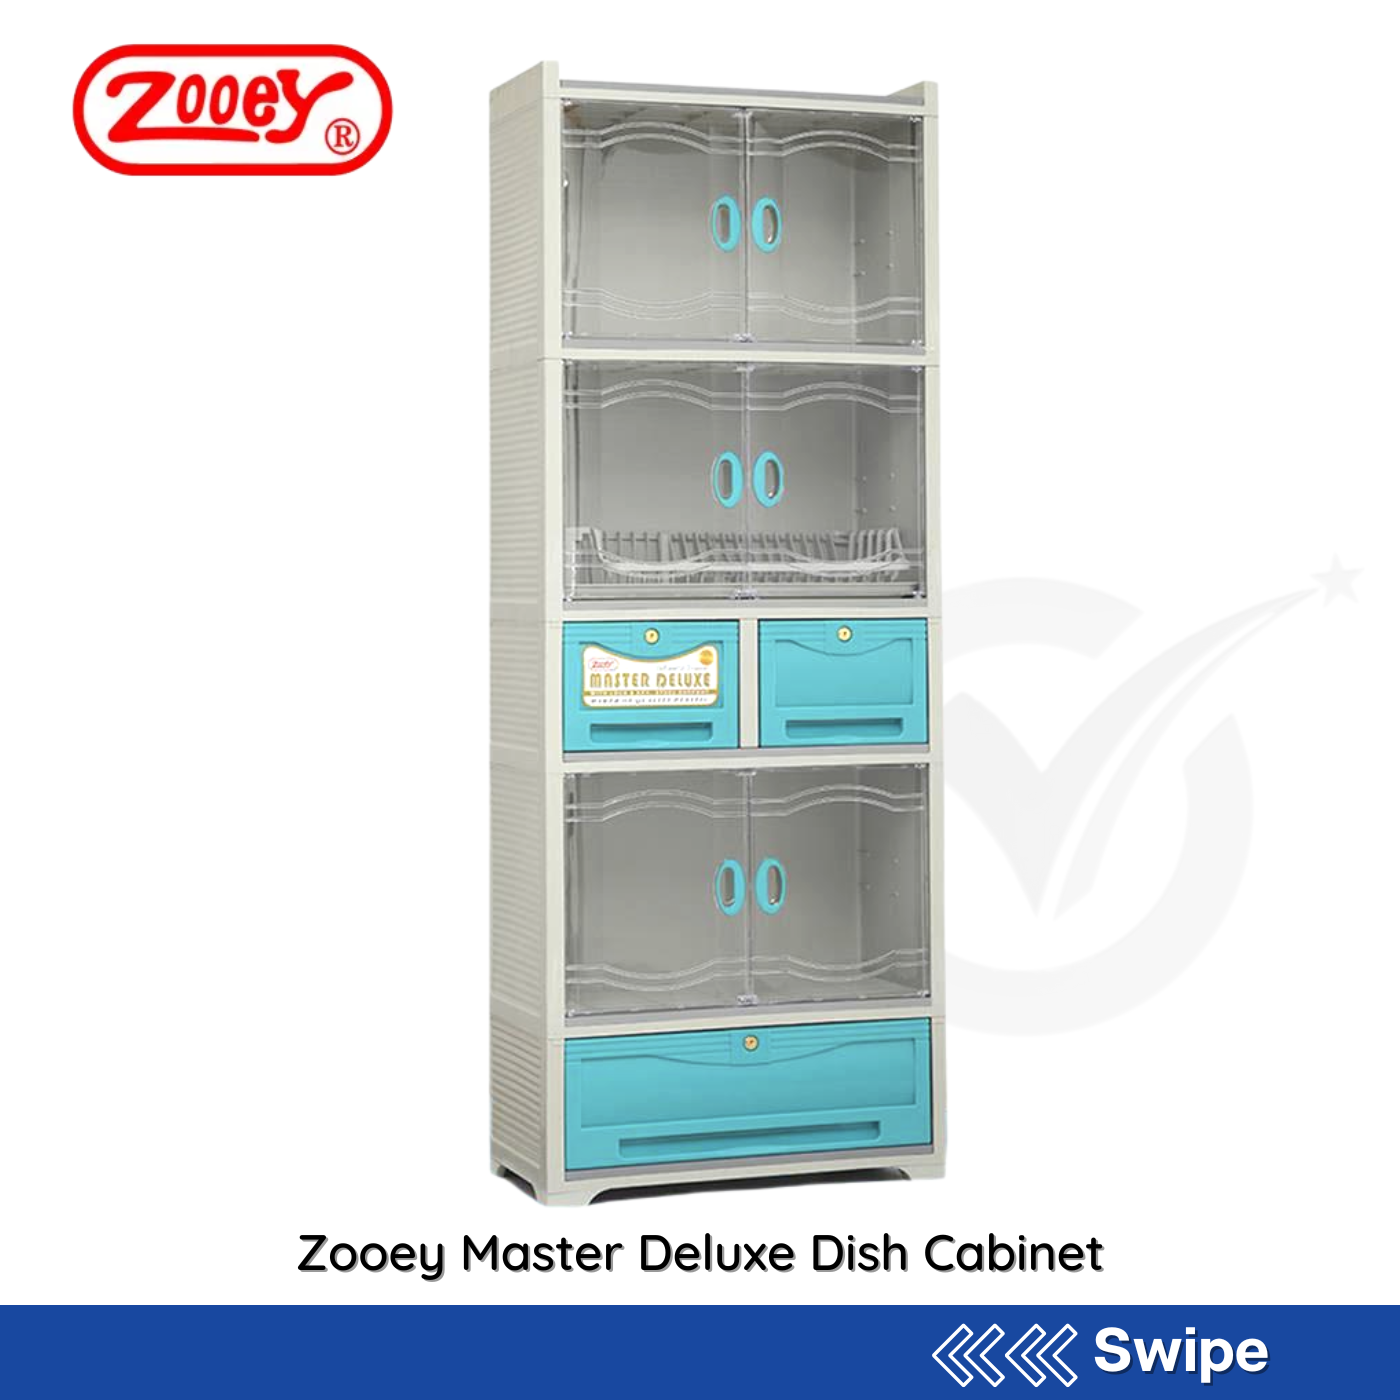 Zooey Master Deluxe Dish Cabinet - People's Choice Marketing